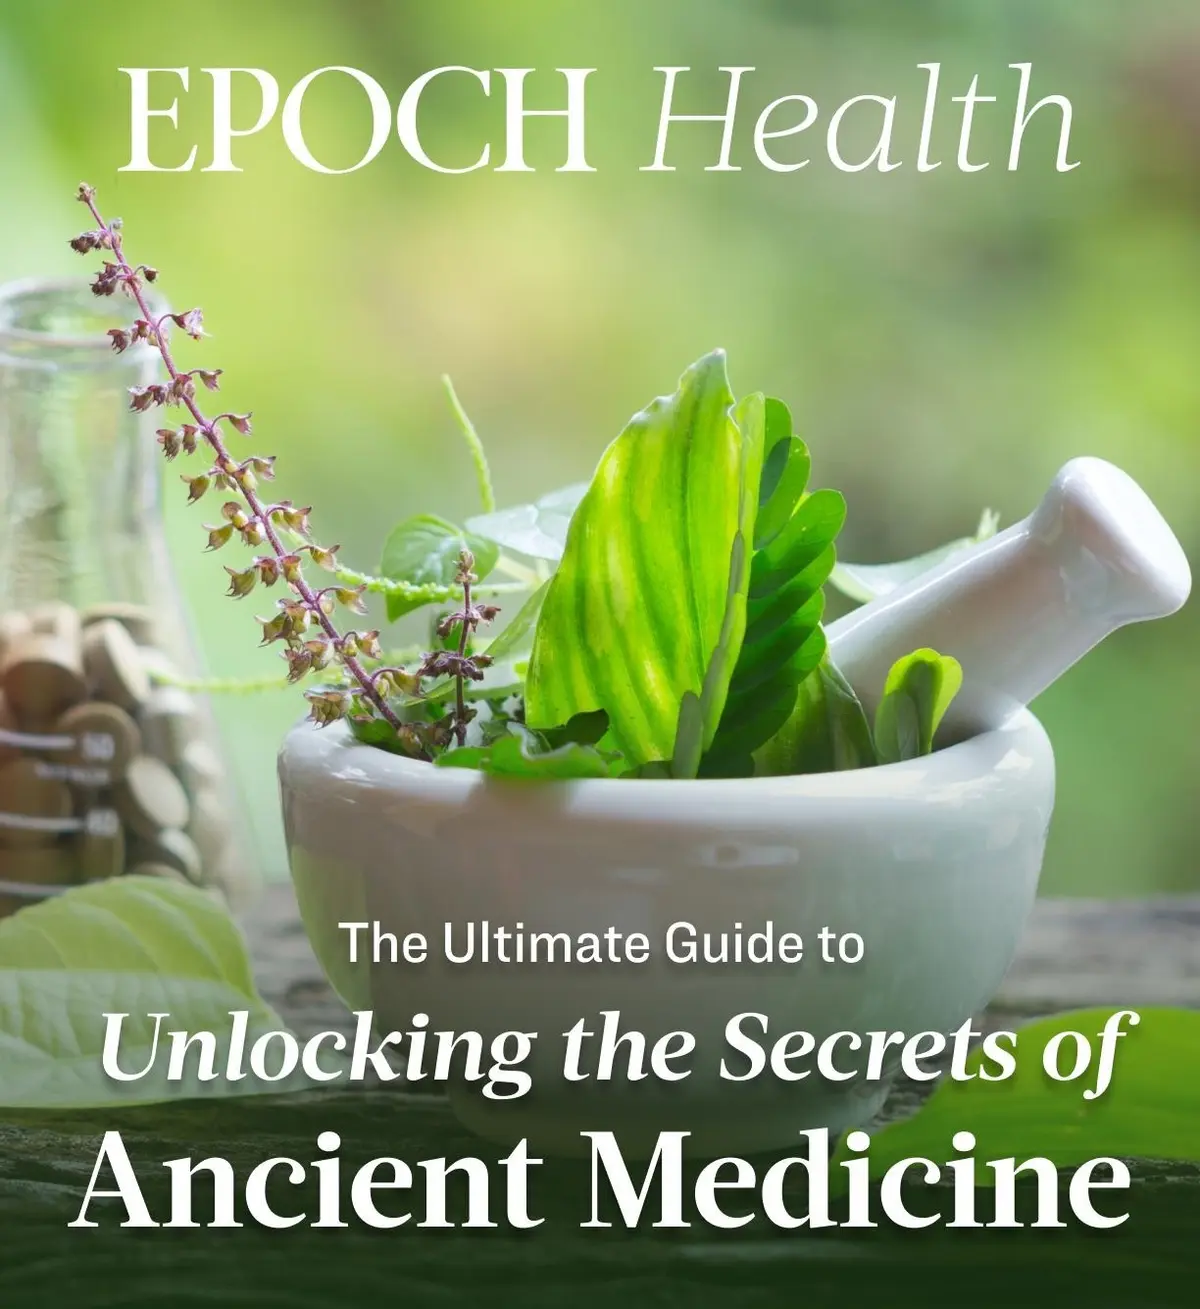 The Ultimate Guide to Unlocking the Secrets of Ancient Medicine